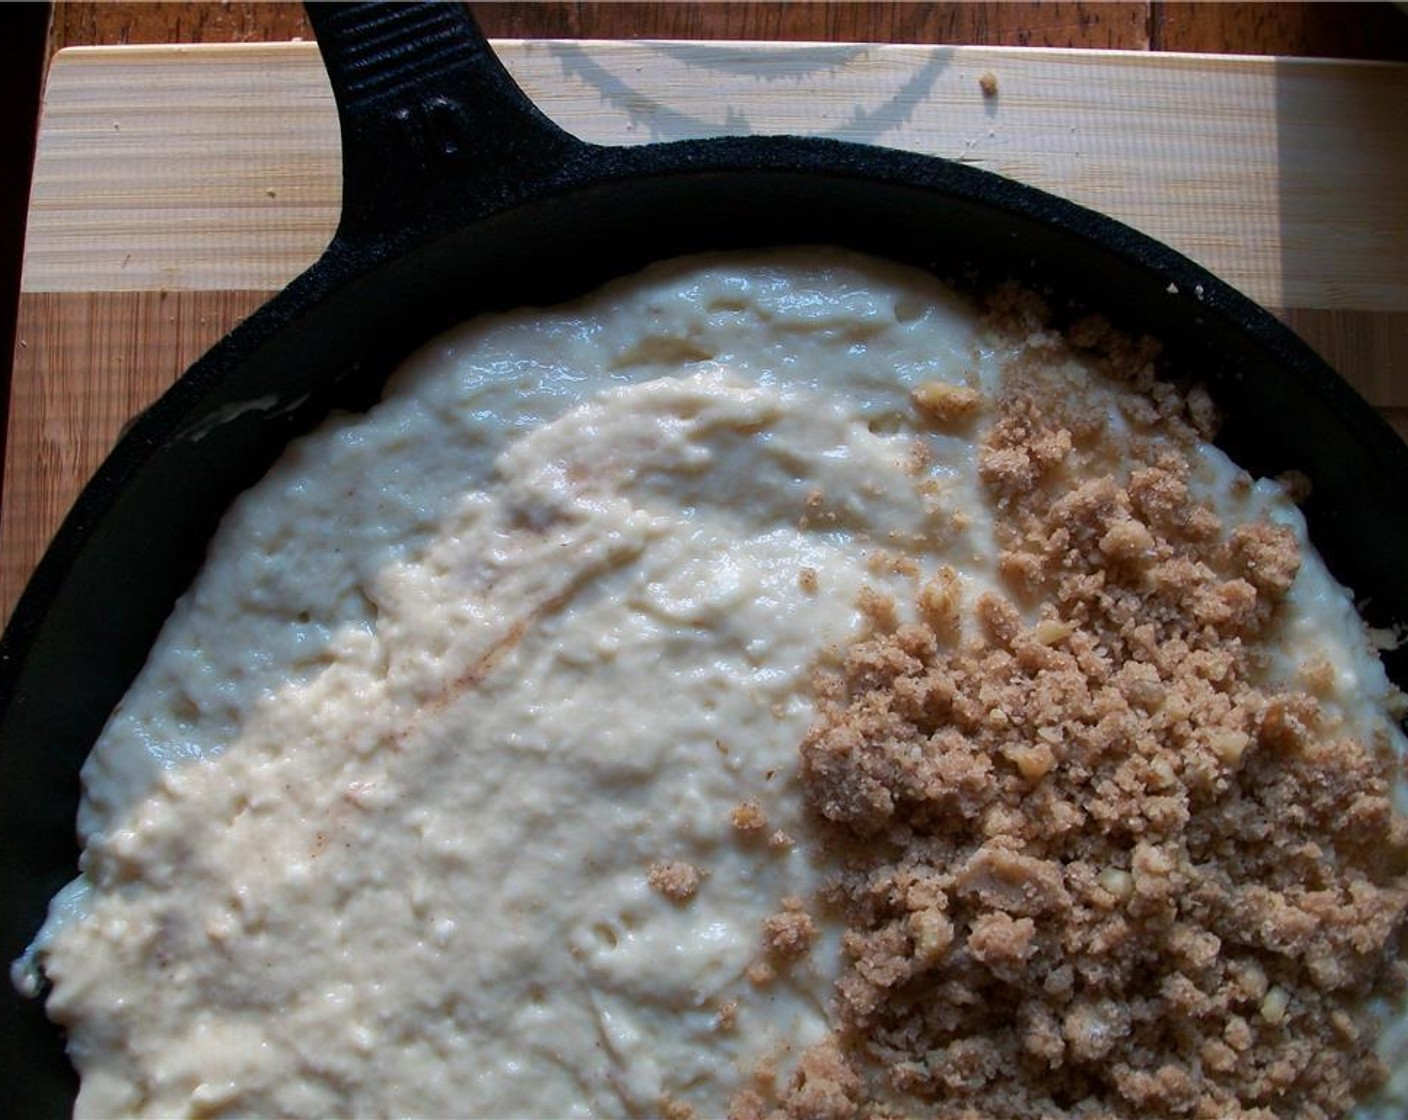 step 6 Combine remaining Unsalted Butter (1/2 cup), Brown Sugar (1/2 cup), Ground Cinnamon (1 Tbsp), walnuts, and remaining All-Purpose Flour (1/4 cup) with a pastry blender or fork until crumbly. Sprinkle over top of cake.